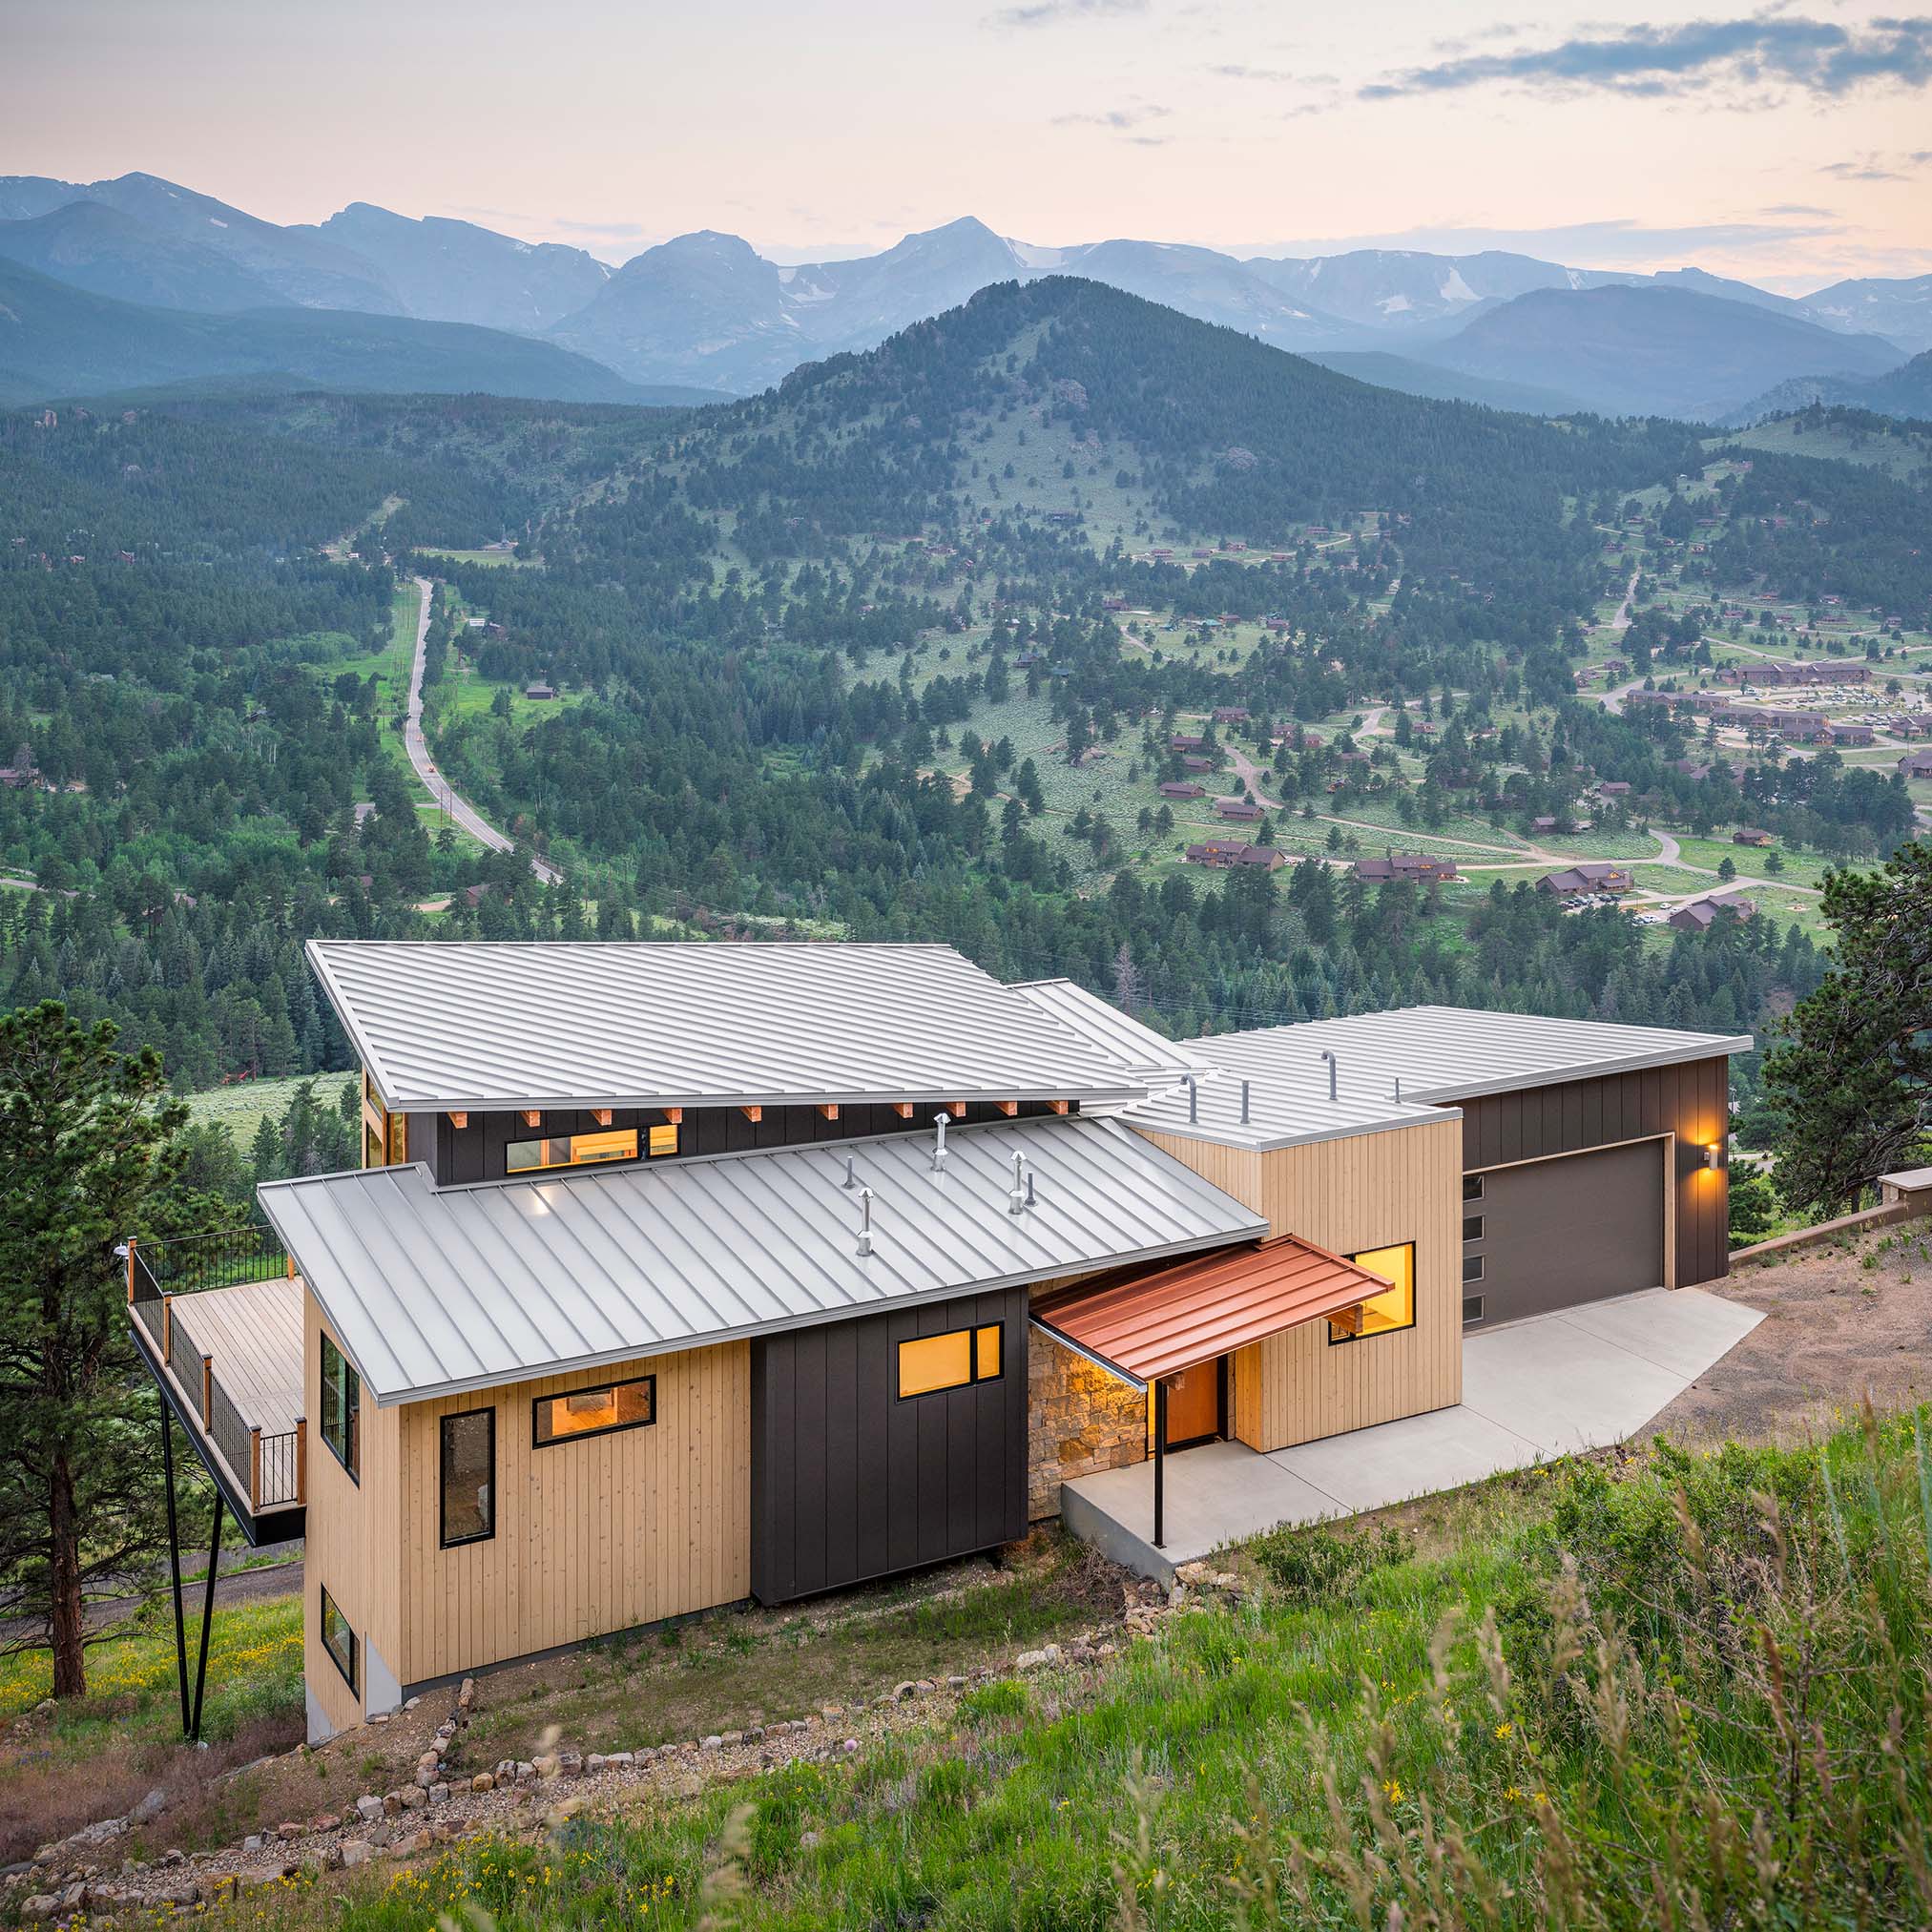 Residential architecture photography by Warren Diggles. Mountain modern home overlooking Estes Park, Colorado. New home project by Bas1s Architecture.